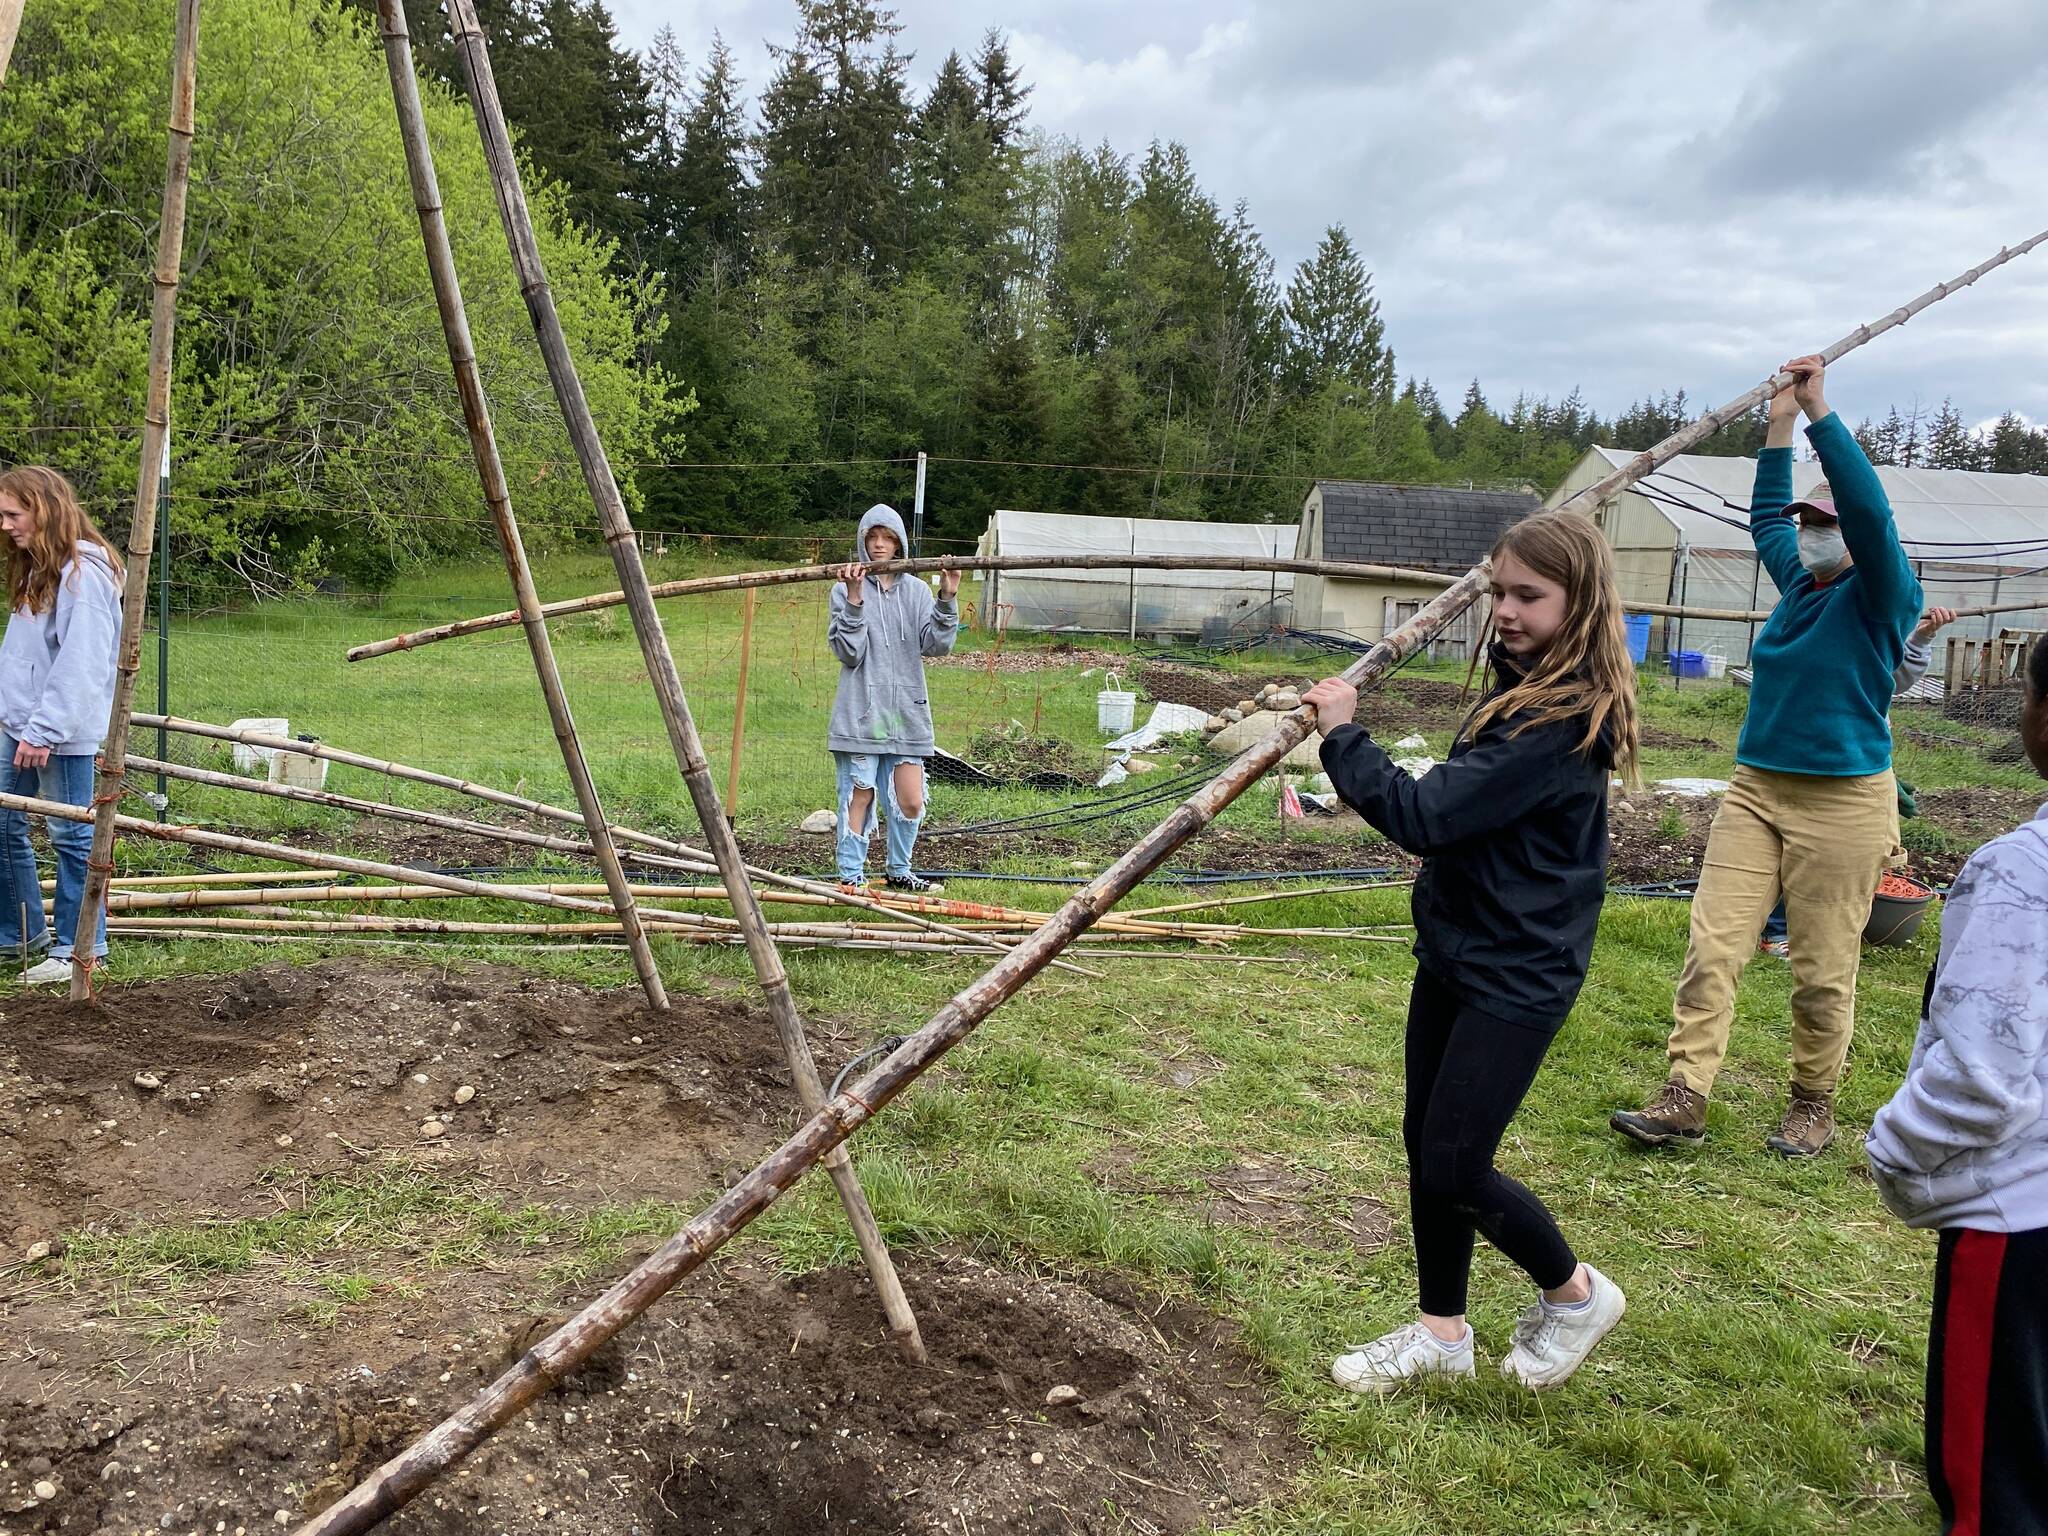 Photo by Cary Peterson
Sixth grader Ellie Aernie and AmeriCorps Service Member Lily Cowan, right, put a bamboo pole into place for the teepee-like structure scarlet runner beans will grow on.